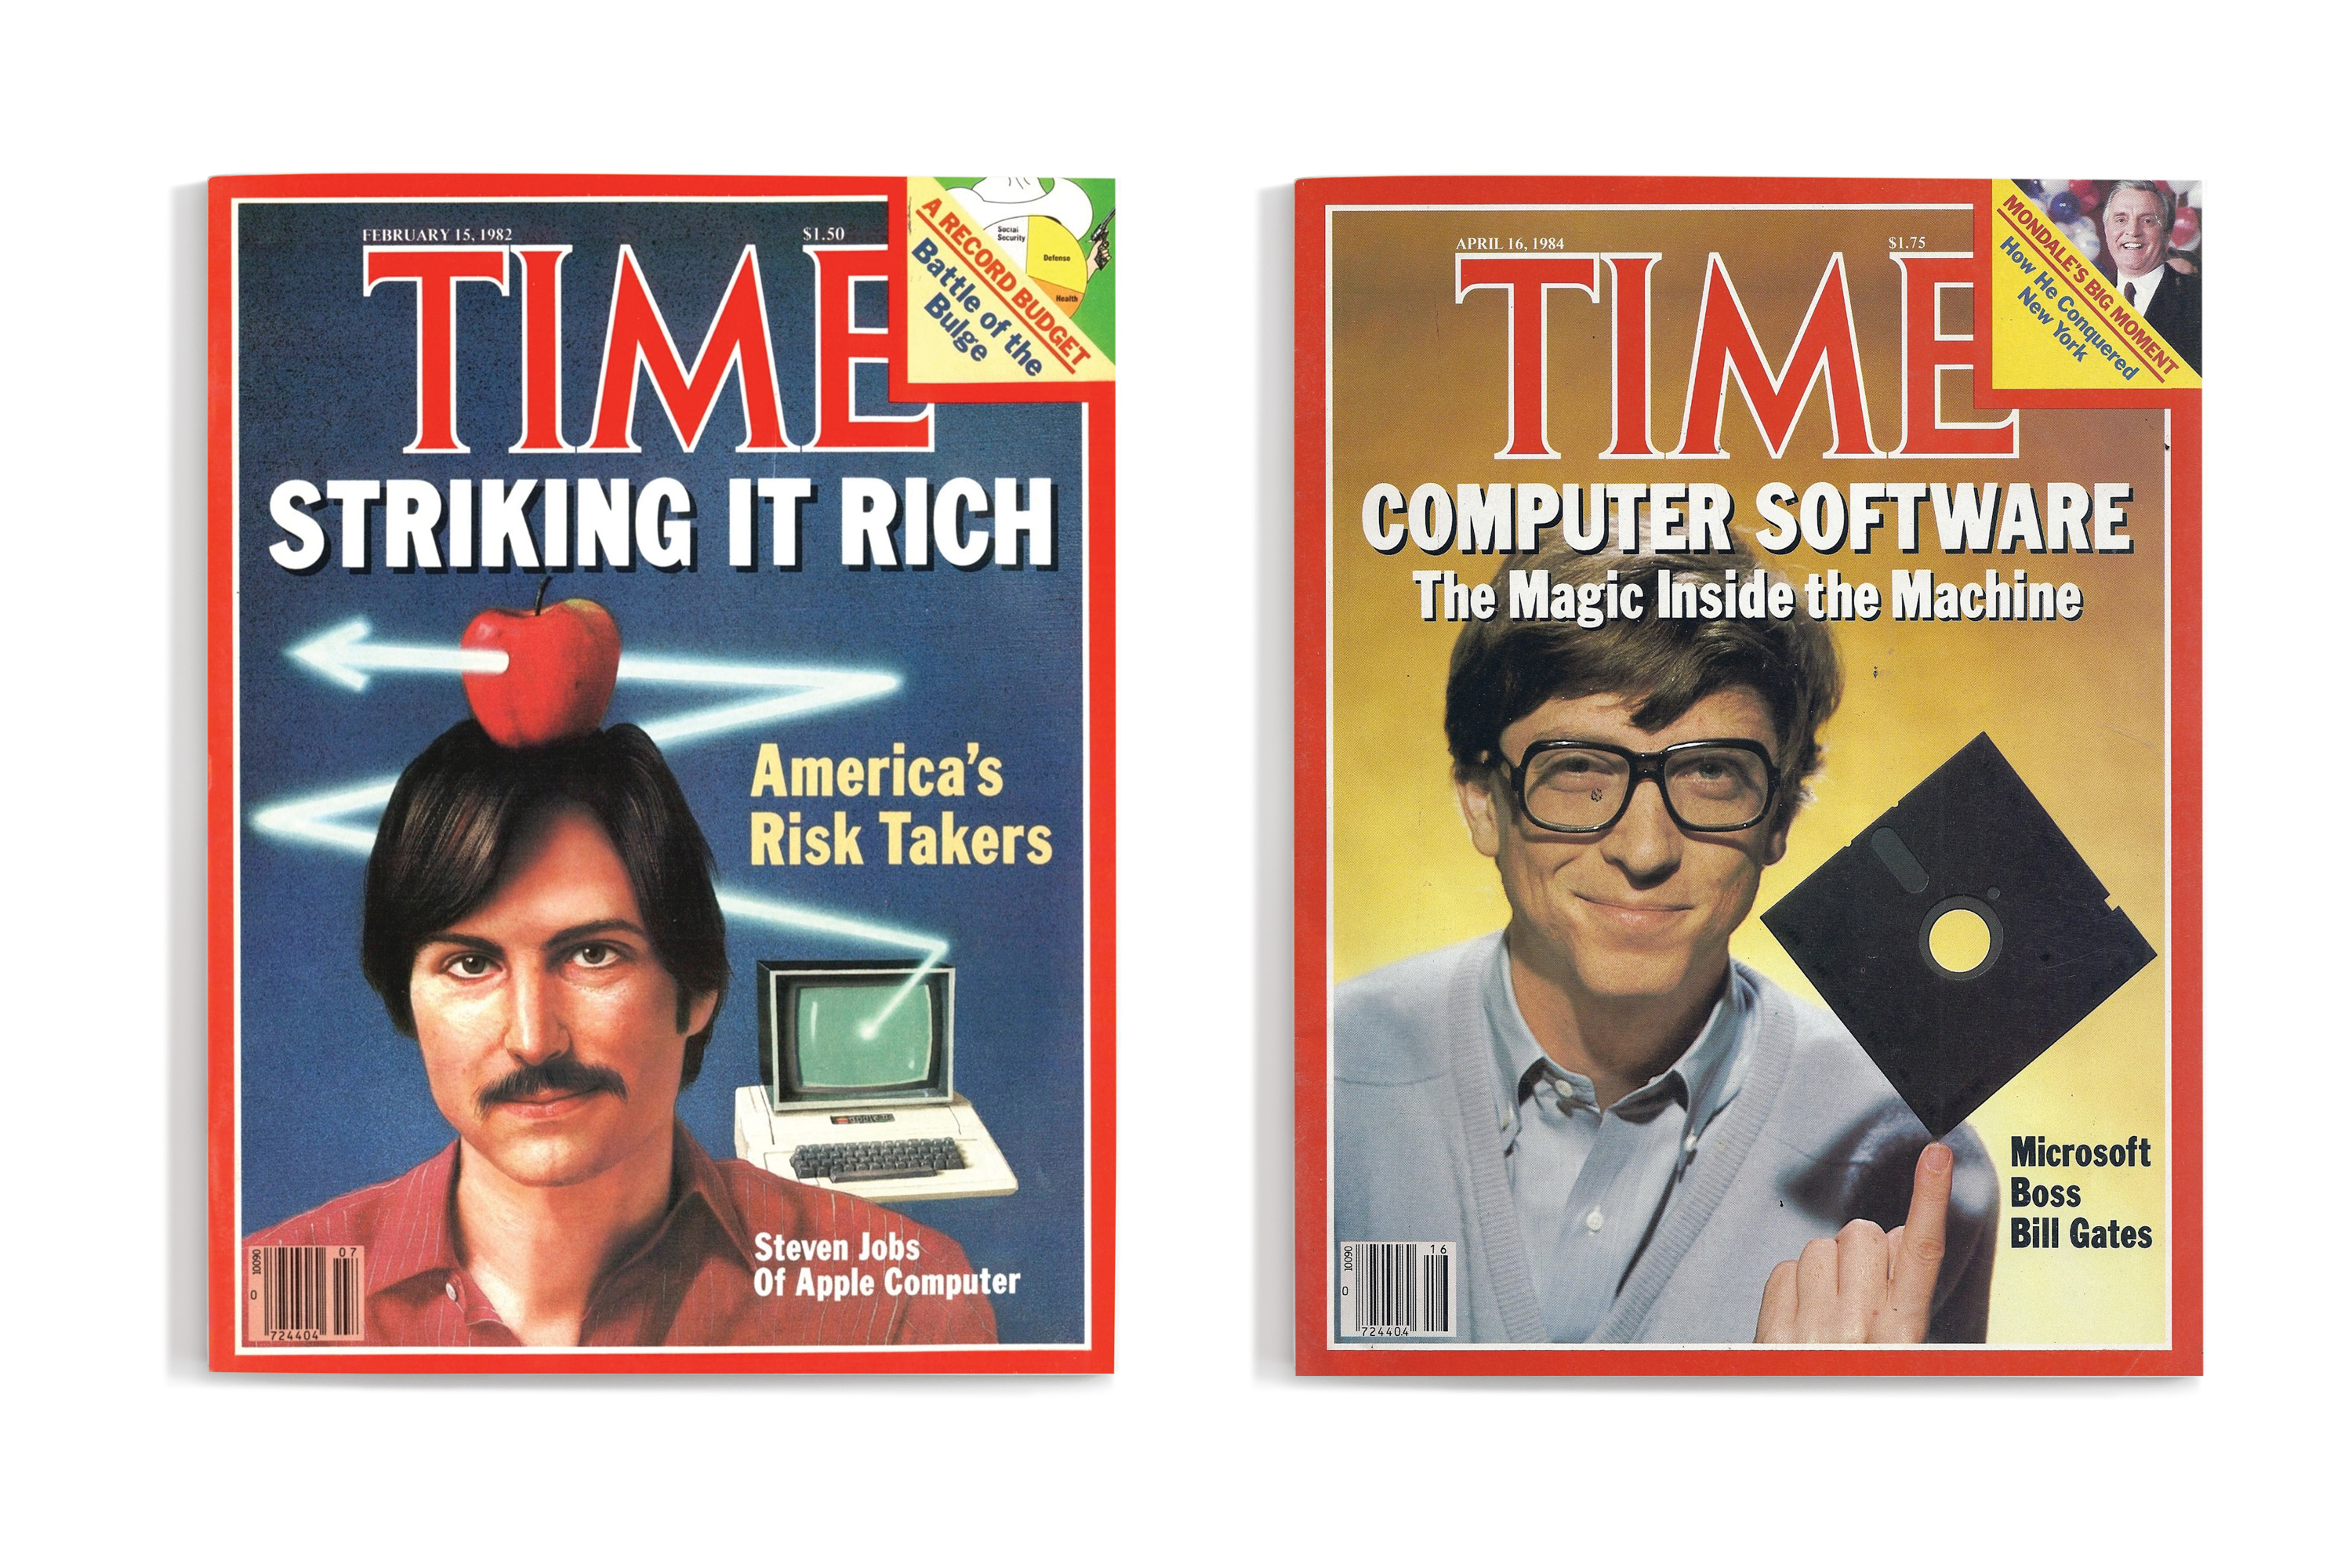 Steve Jobs and Bill Gates each on a Time magazine cover